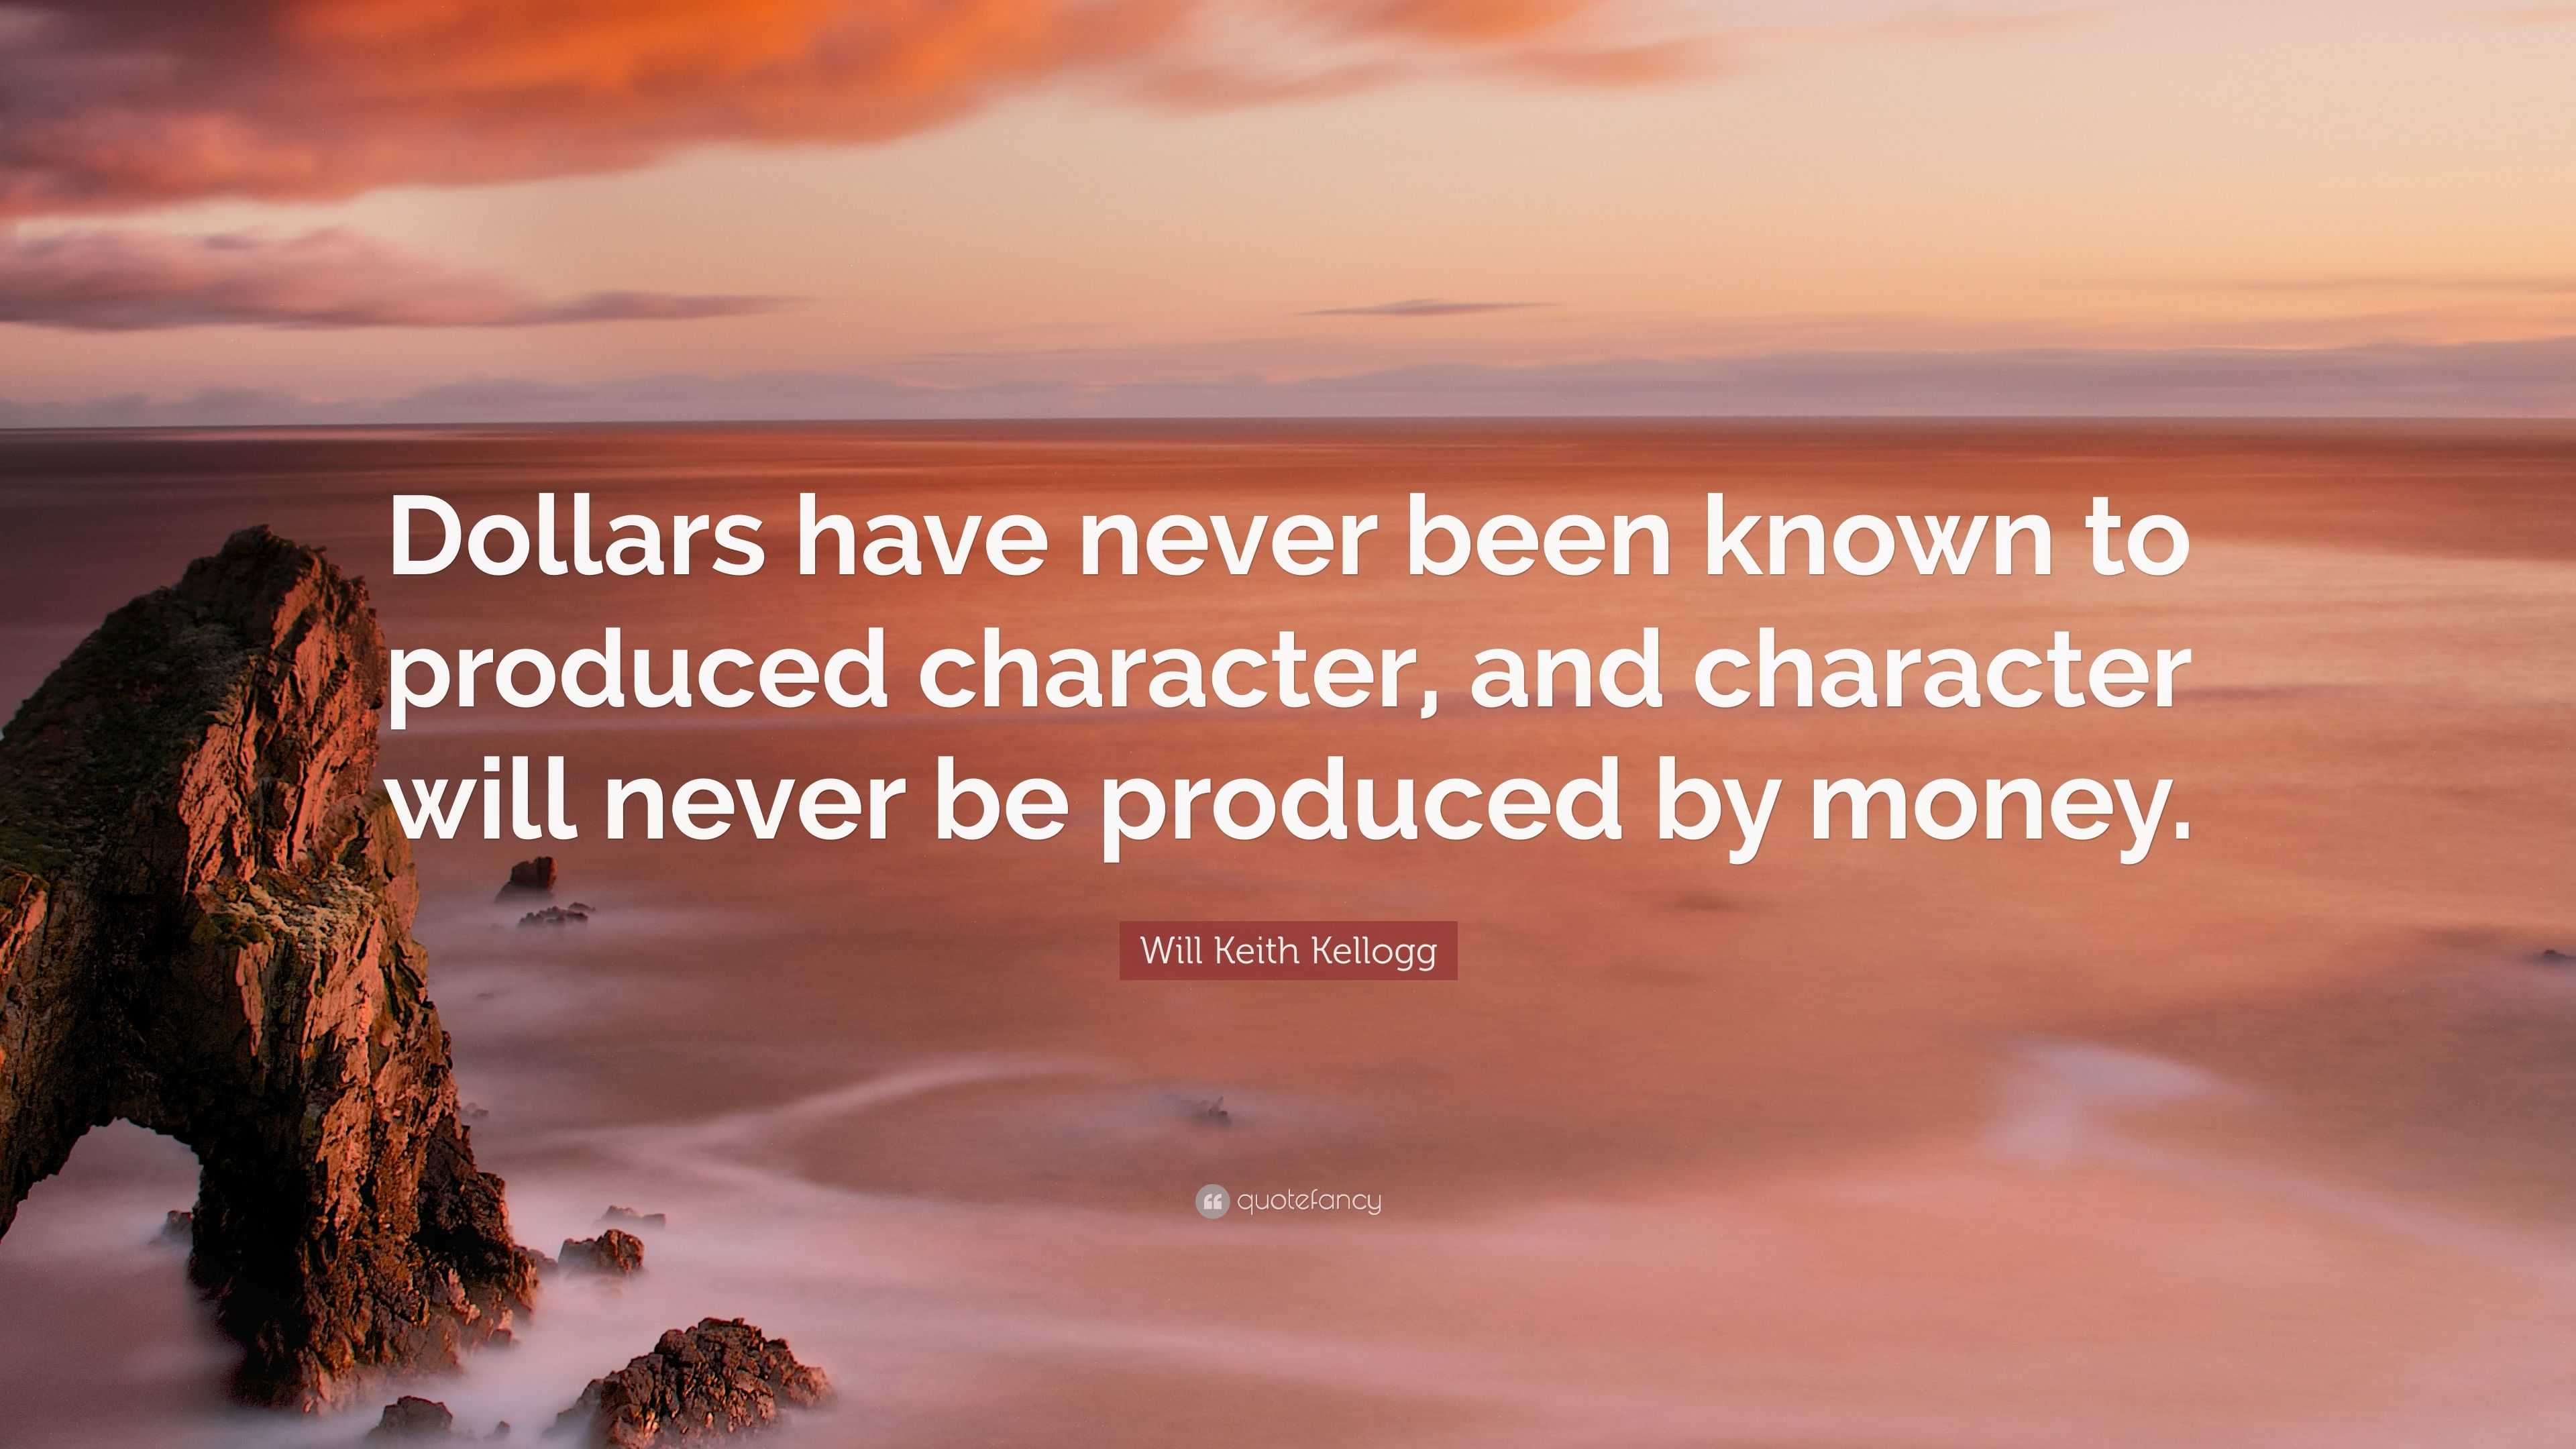 Will Keith Kellogg Quote: “Dollars have never been known to produced ...